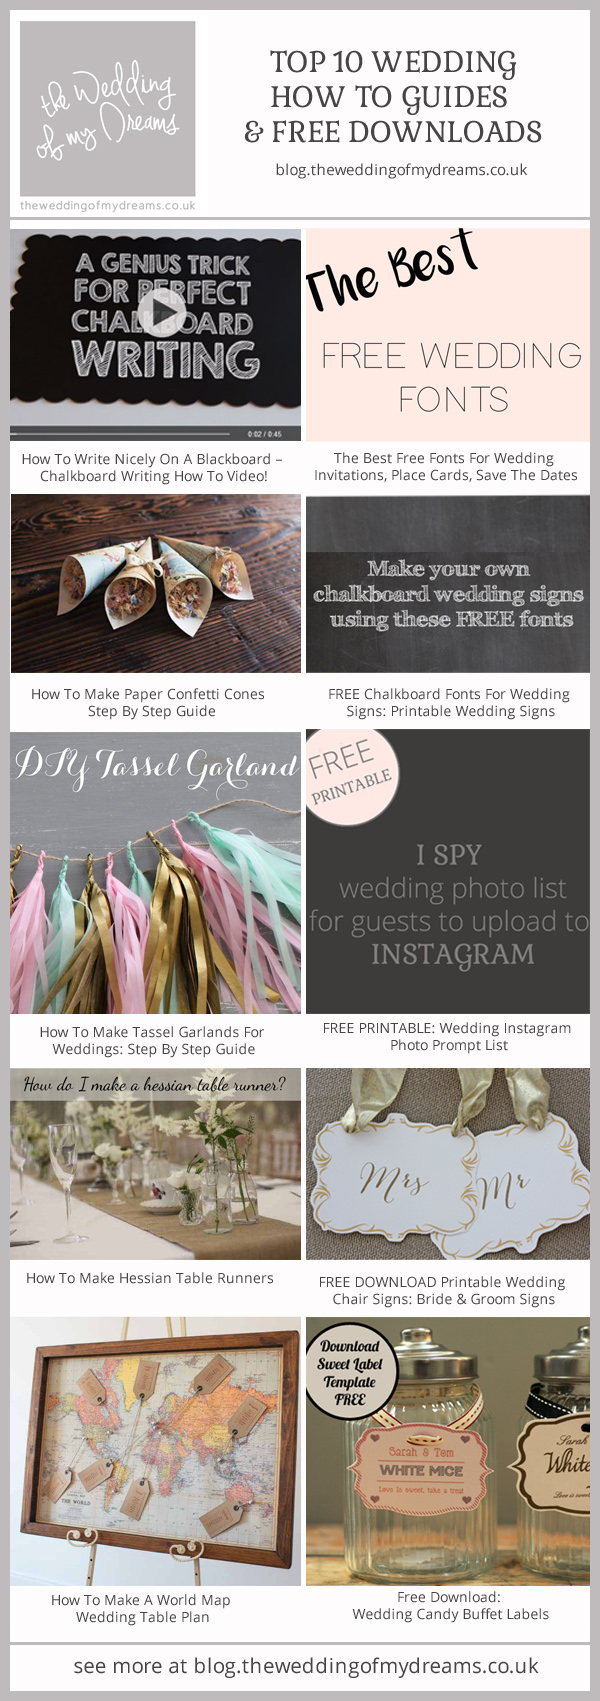 Top 10 Wedding How To Guides And Free Downloads From The Wedding of my Dreams